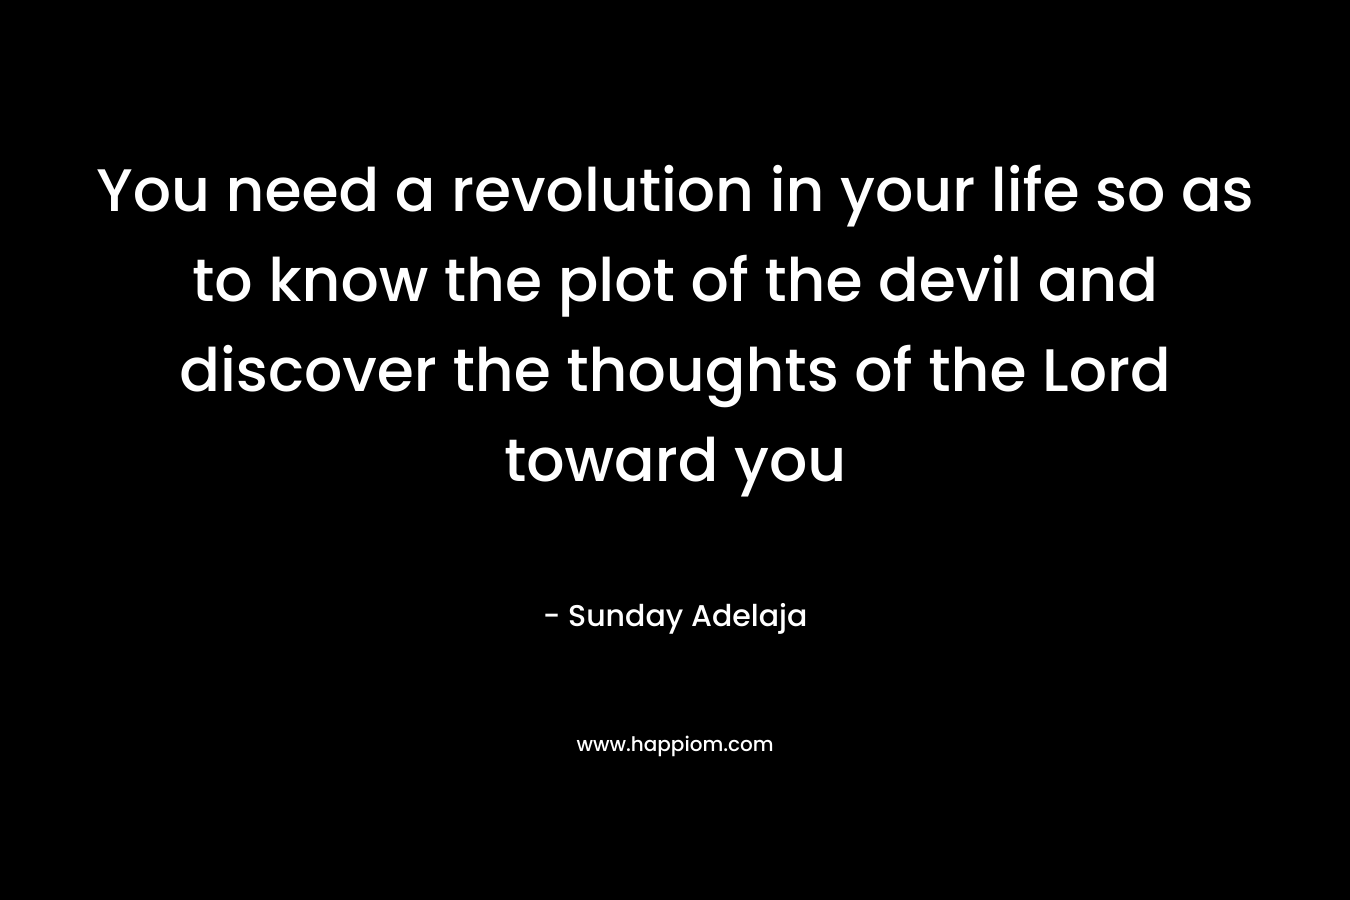 You need a revolution in your life so as to know the plot of the devil and discover the thoughts of the Lord toward you